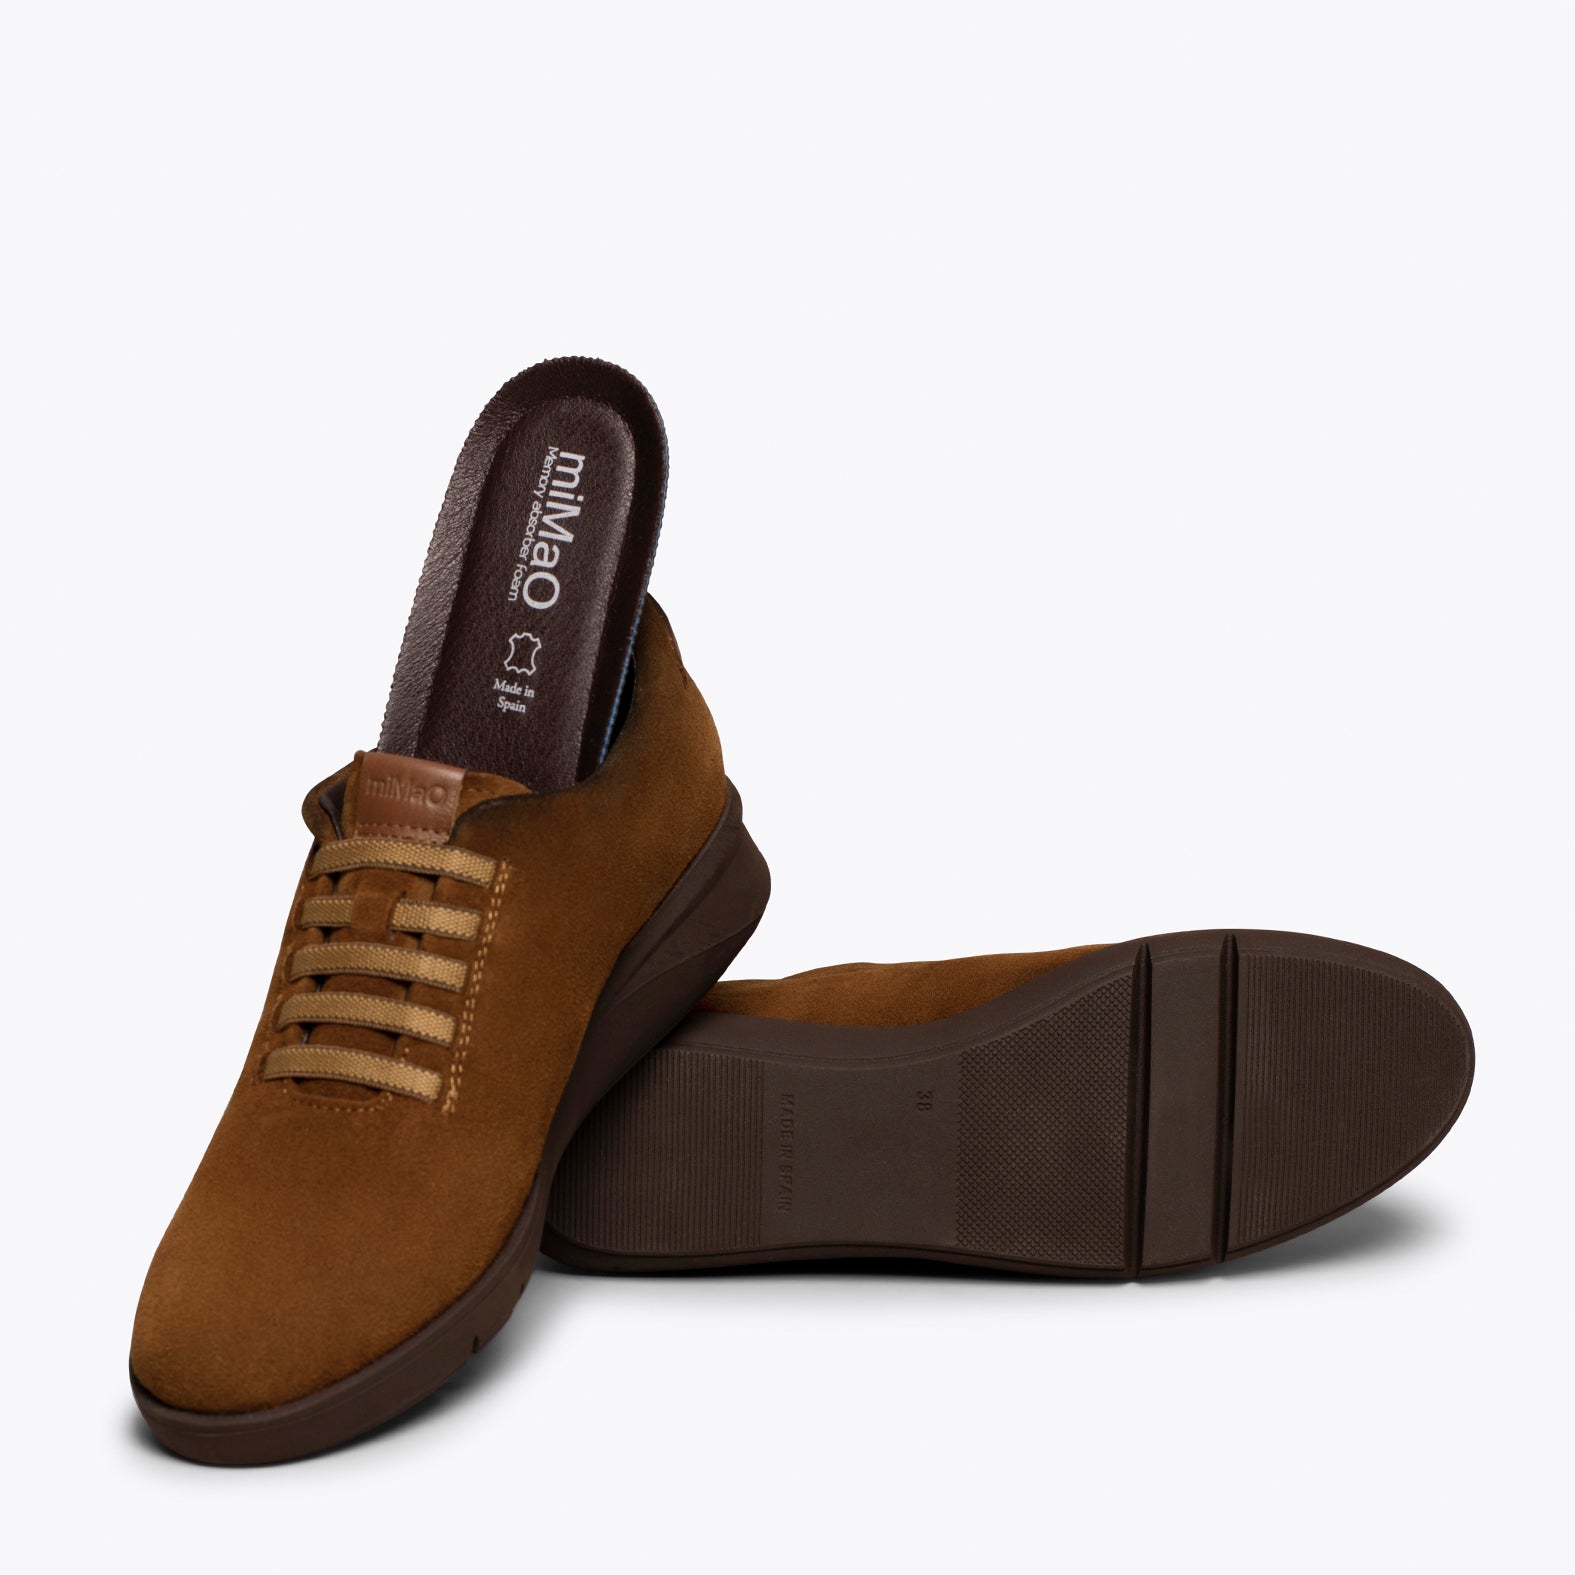 FLY – CAMEL casual sneaker with elastic laces